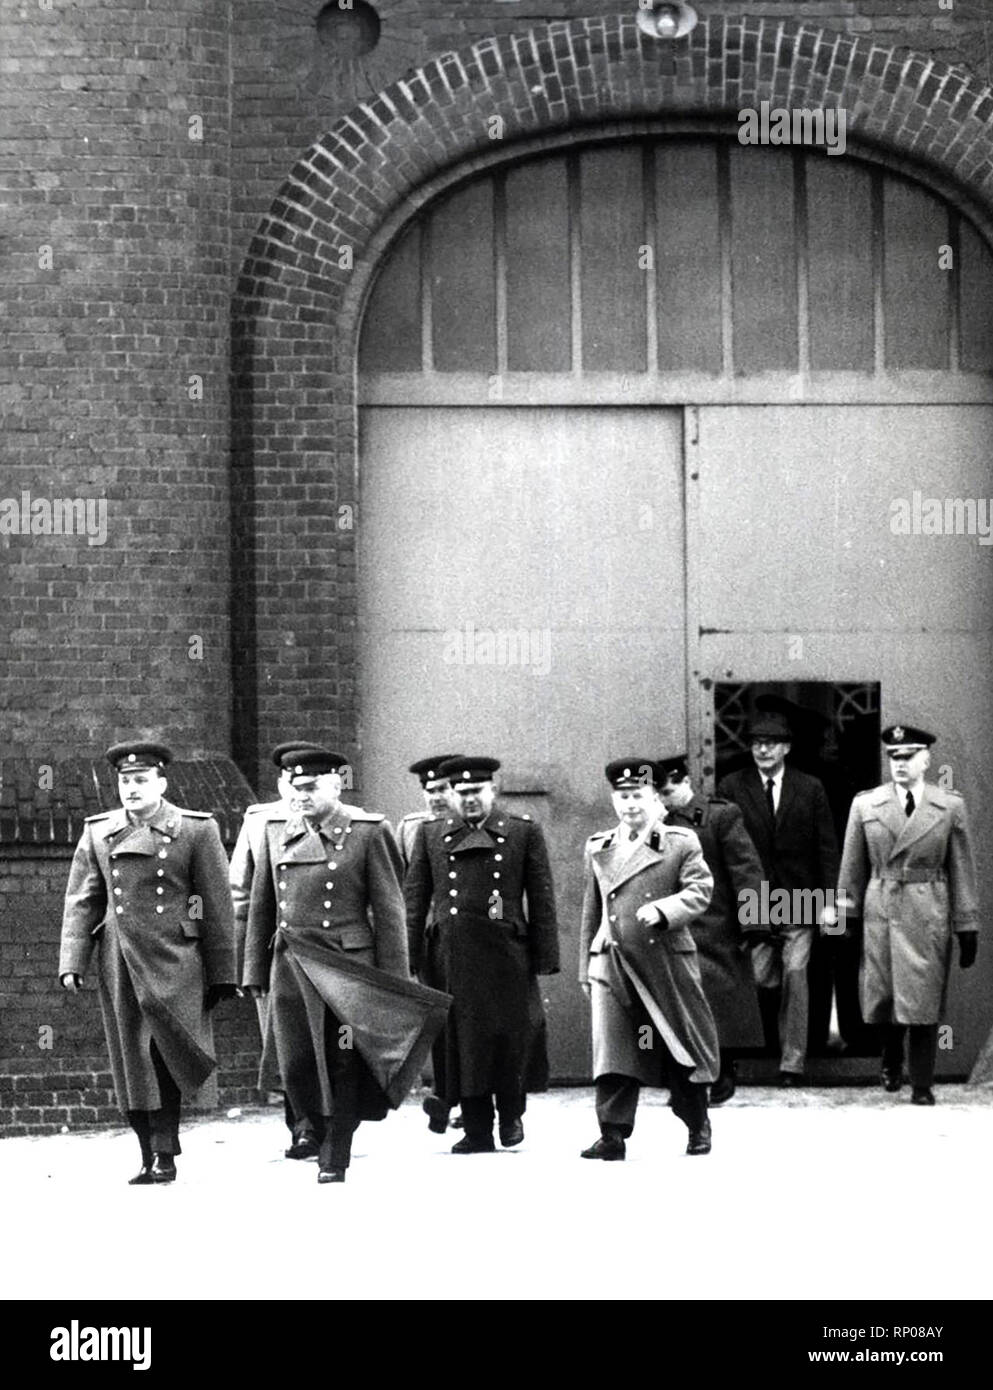 4/1/1962 -  The Senior Soviet Commander Lt. Col. Solowjew (Second From Left) Arrived at The Spandauer War Criminal Prison On April 1, 1962. On This Day Americans Are Relieving Soviet Guards of Their Duty at The Prison. Lt. Col Solojew Entered The Prison Over The British Sector Since He Was Denied Access By Americans to West Berlin On Their Border. Stock Photo